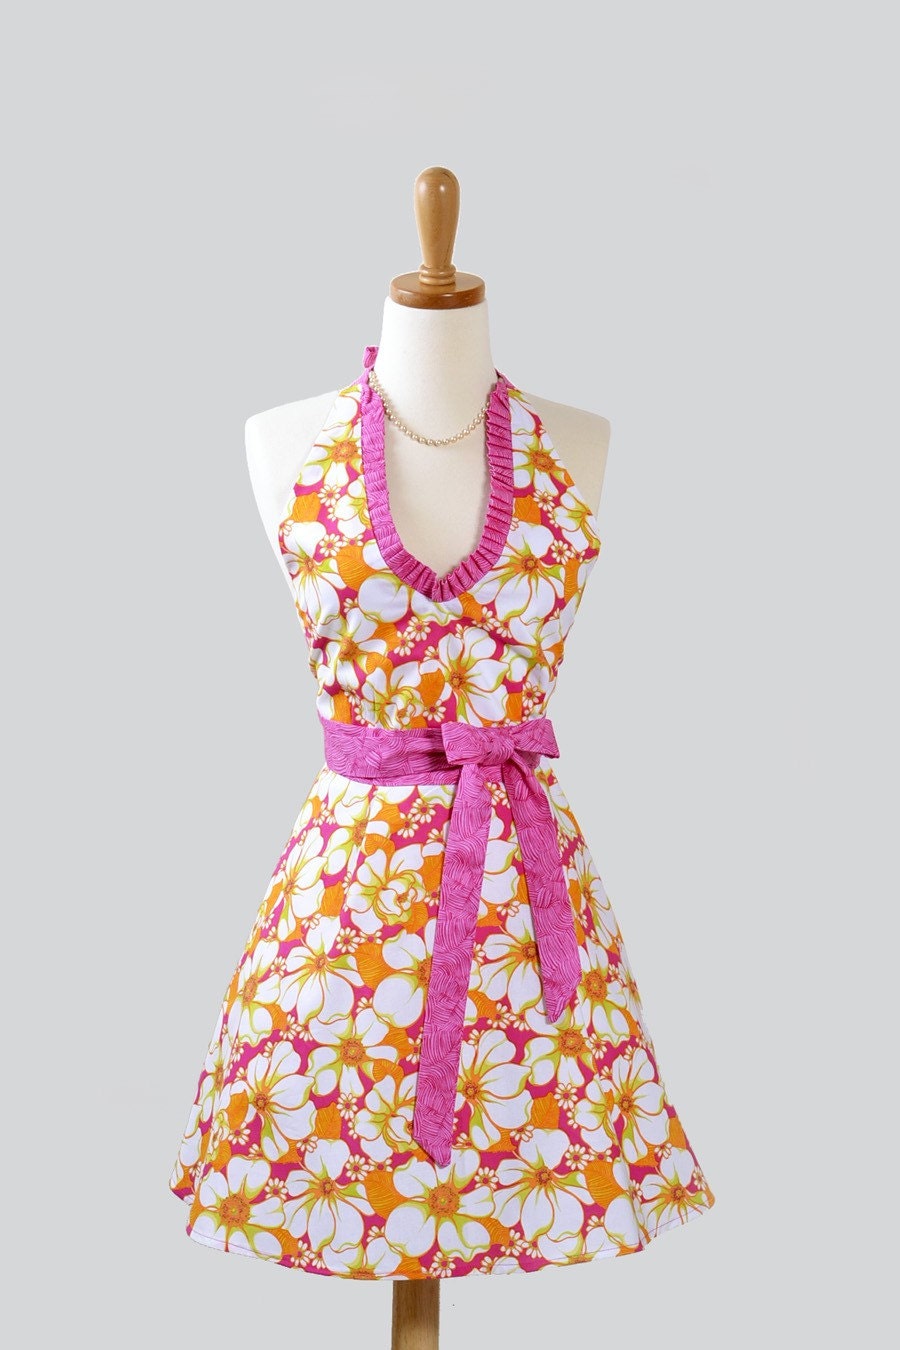 Sexy Halter Hostess Apron . Classy, Flirty and Oh So Beautiful Halter Apron Features Magnolia Blooms on Hot Pink